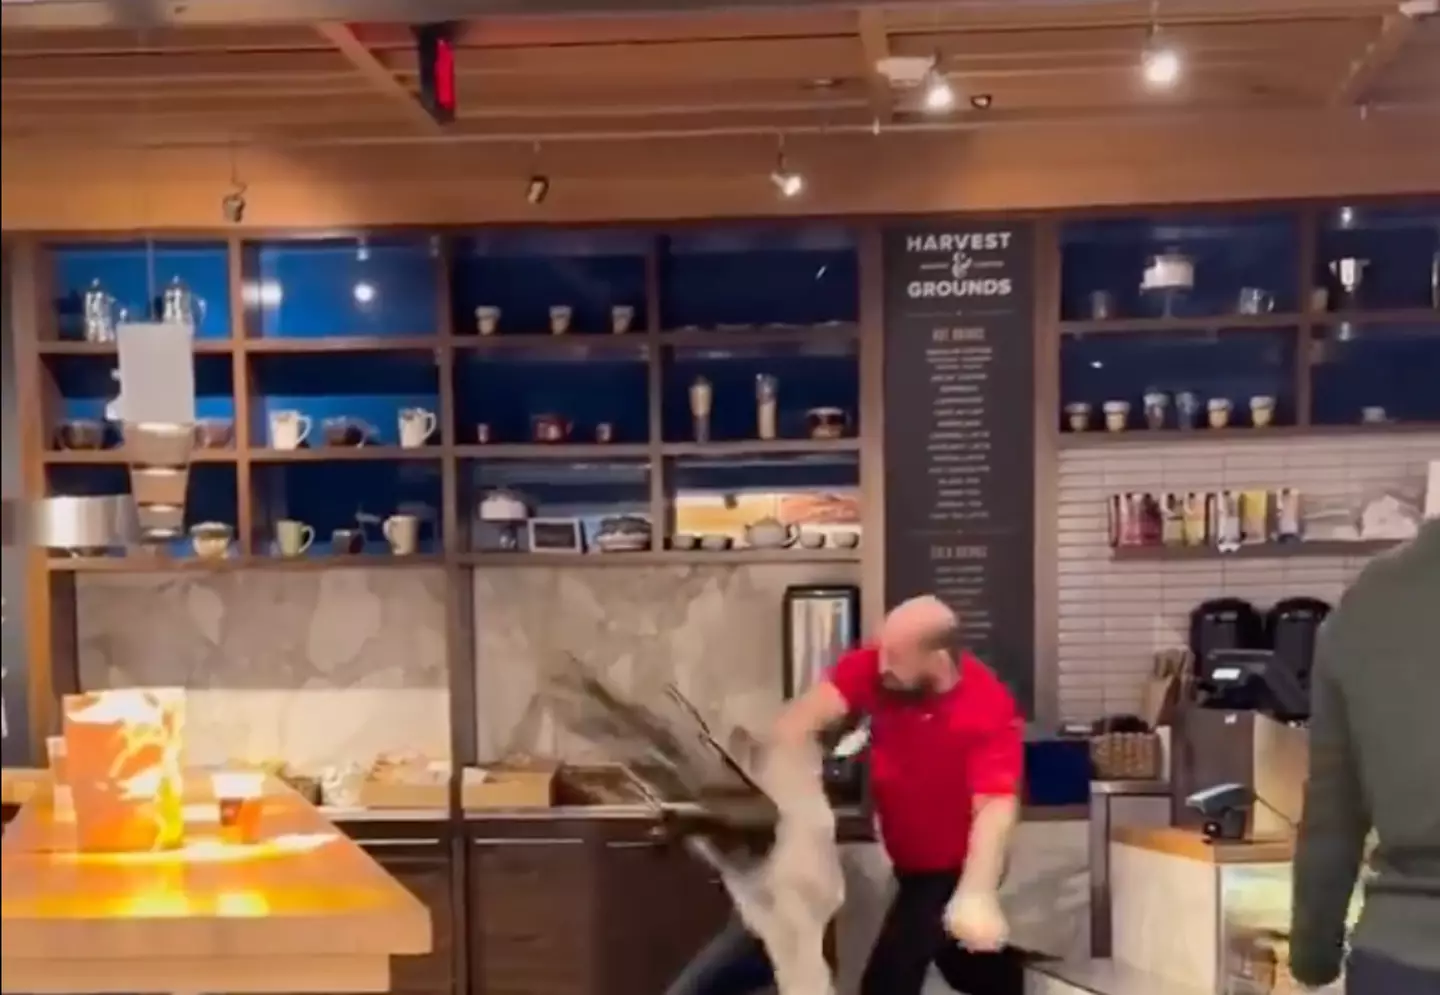 The man in red threw the employee violently to the floor.